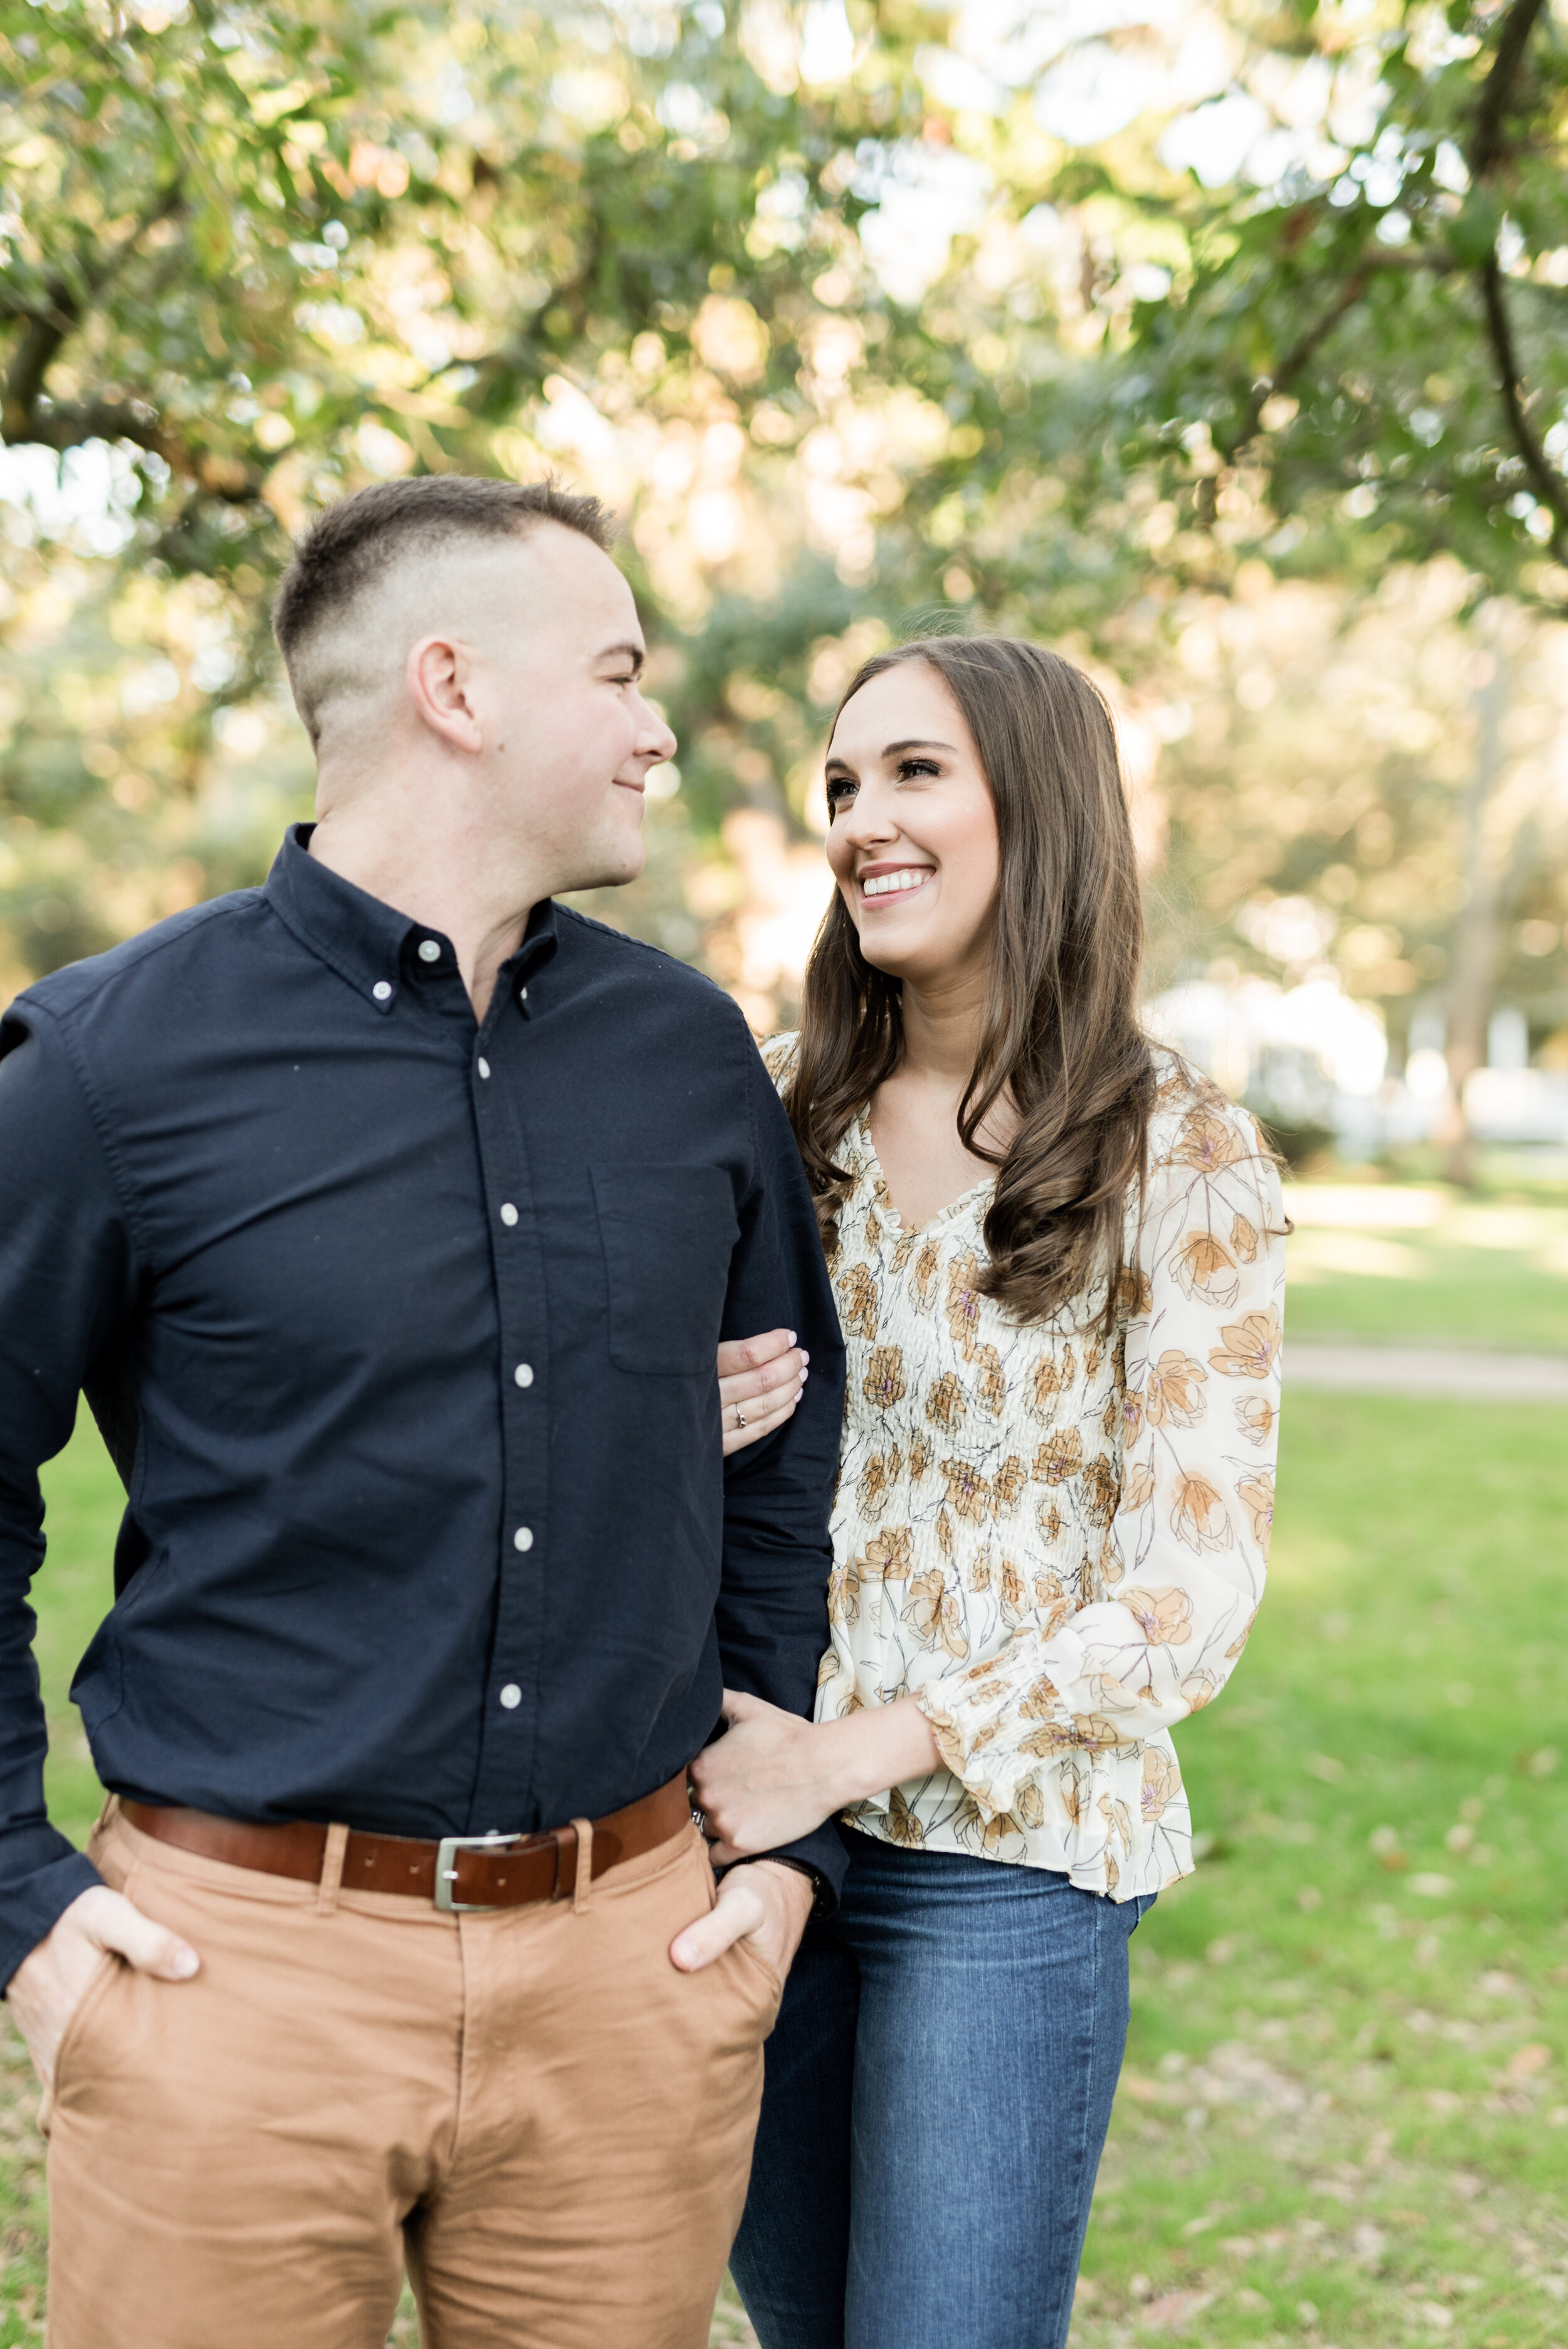 Washington Square Engagement Session Portraits of Rachel + Chase's Engagement Photographed by Kristen Marcus Photography